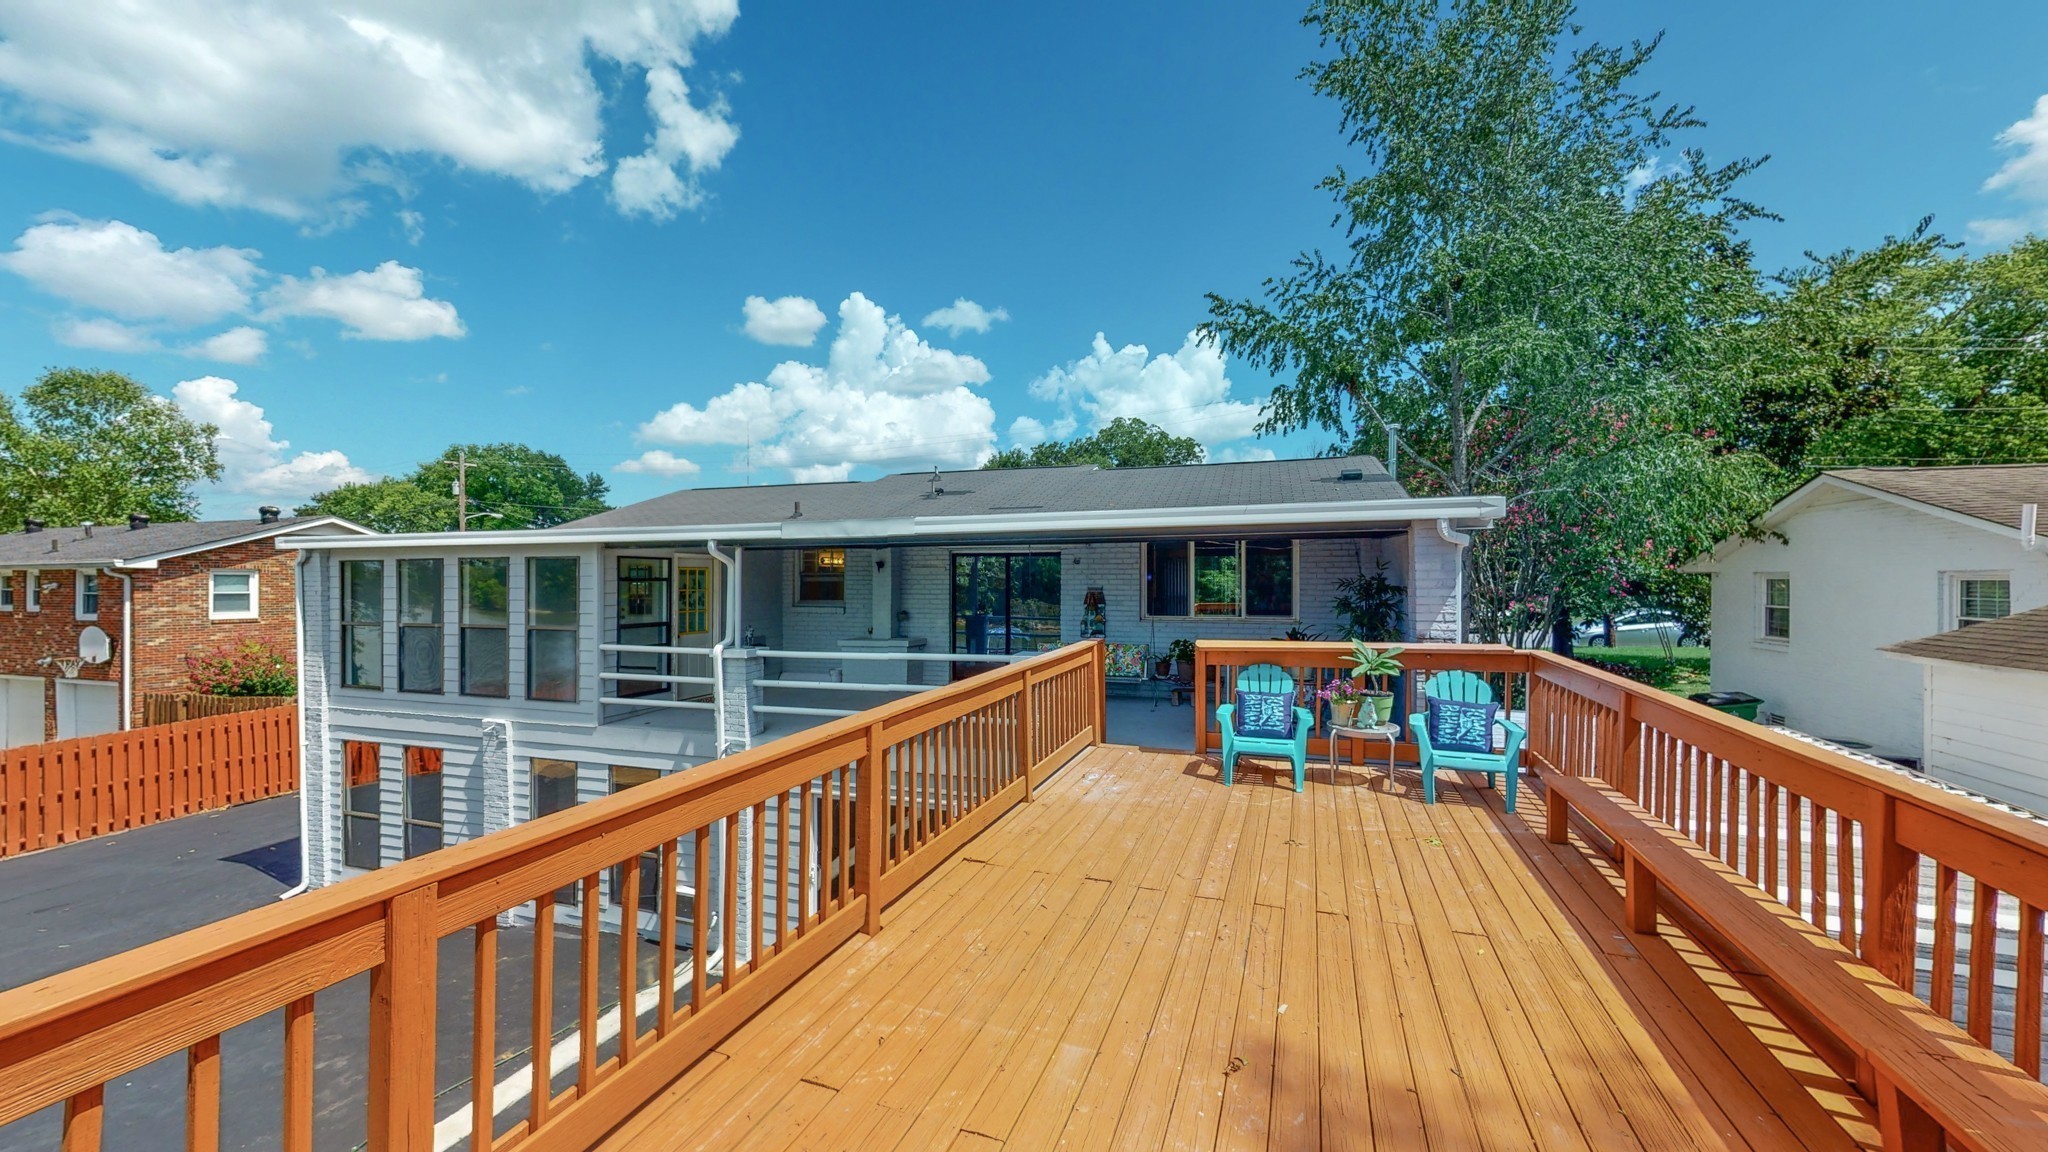 a view of house with deck and outdoor seating